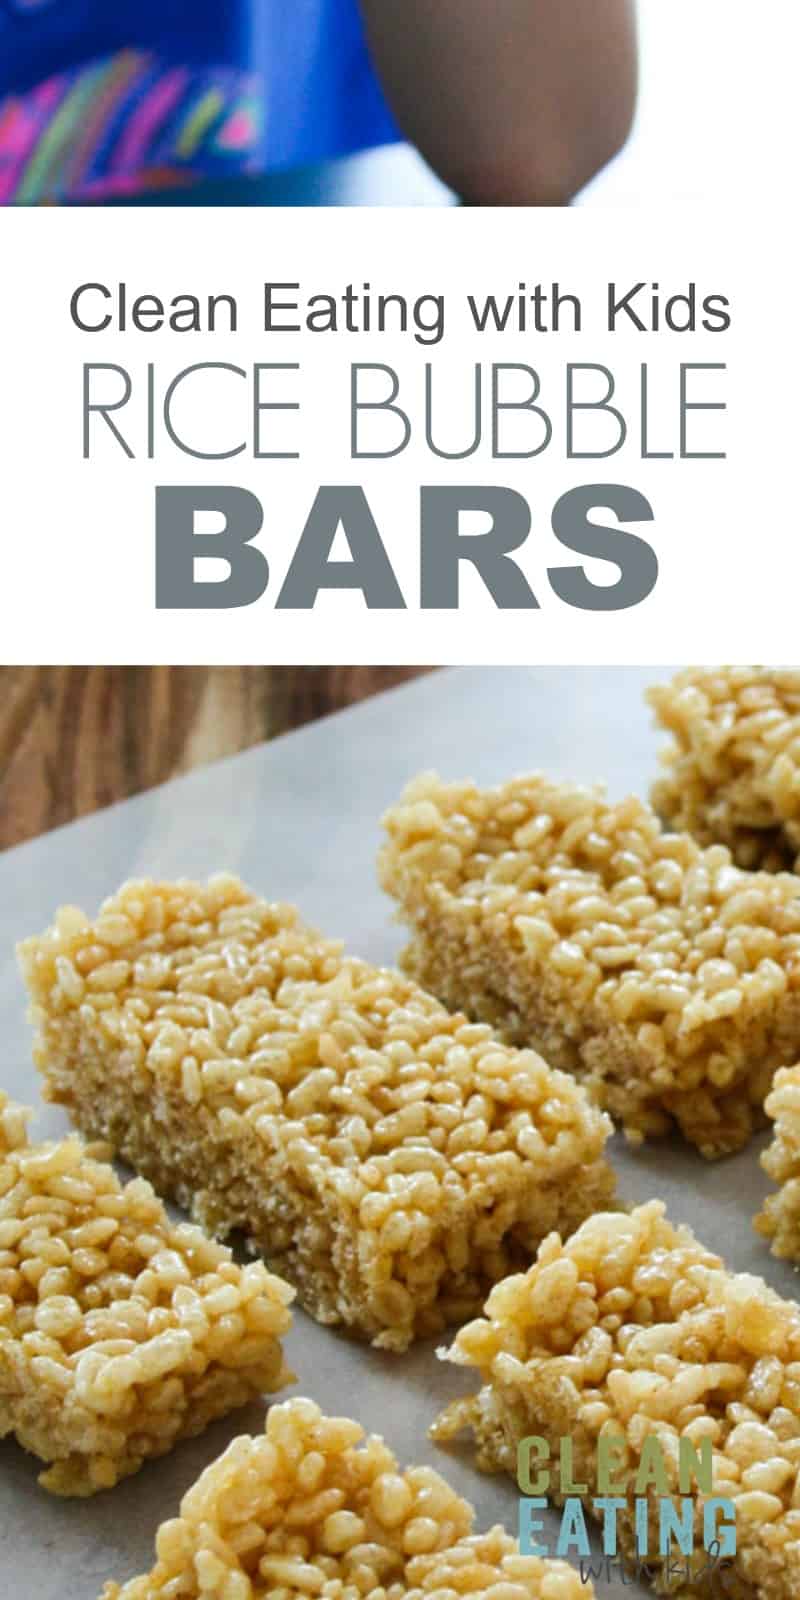 Clean Eating Rice Krispie Treats - 3 Ingredient No Bake Healthy Rice Krispy Treats- Just three ingredients and only takes 5 minutes to make. CleanEatingWithKids.com